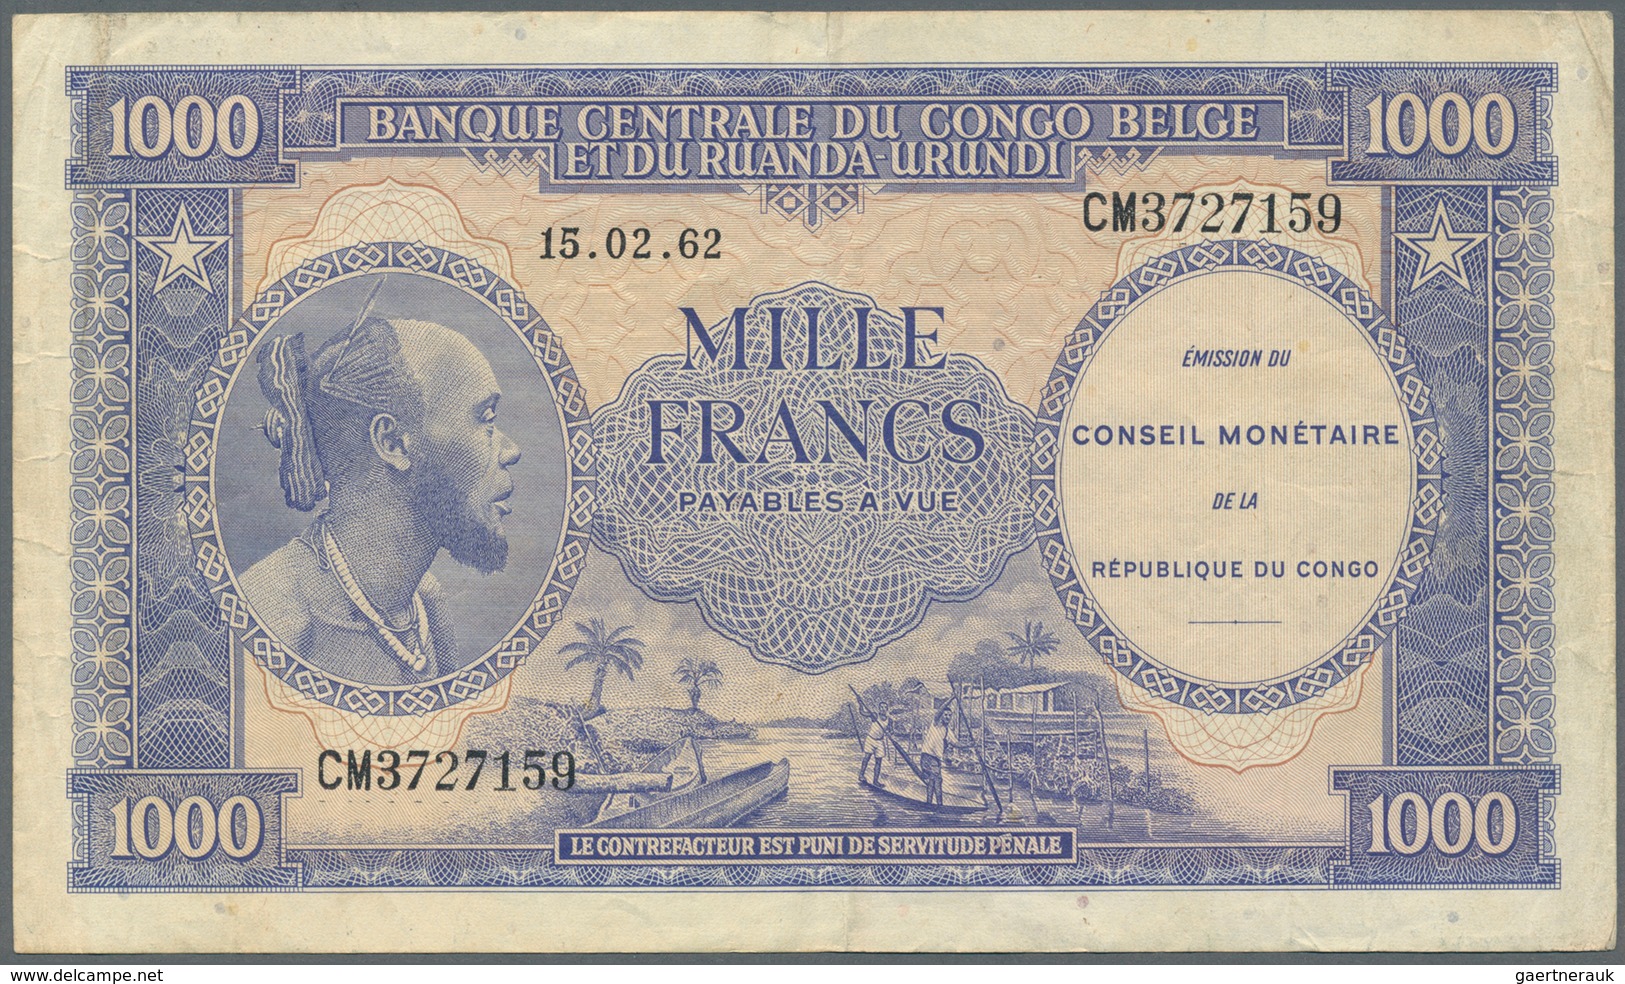 01317 Congo / Kongo: 1000 Francs 1962 P. 2, Used With Folds And Creases, No Holes Or Tears, Still Crispnes - Unclassified